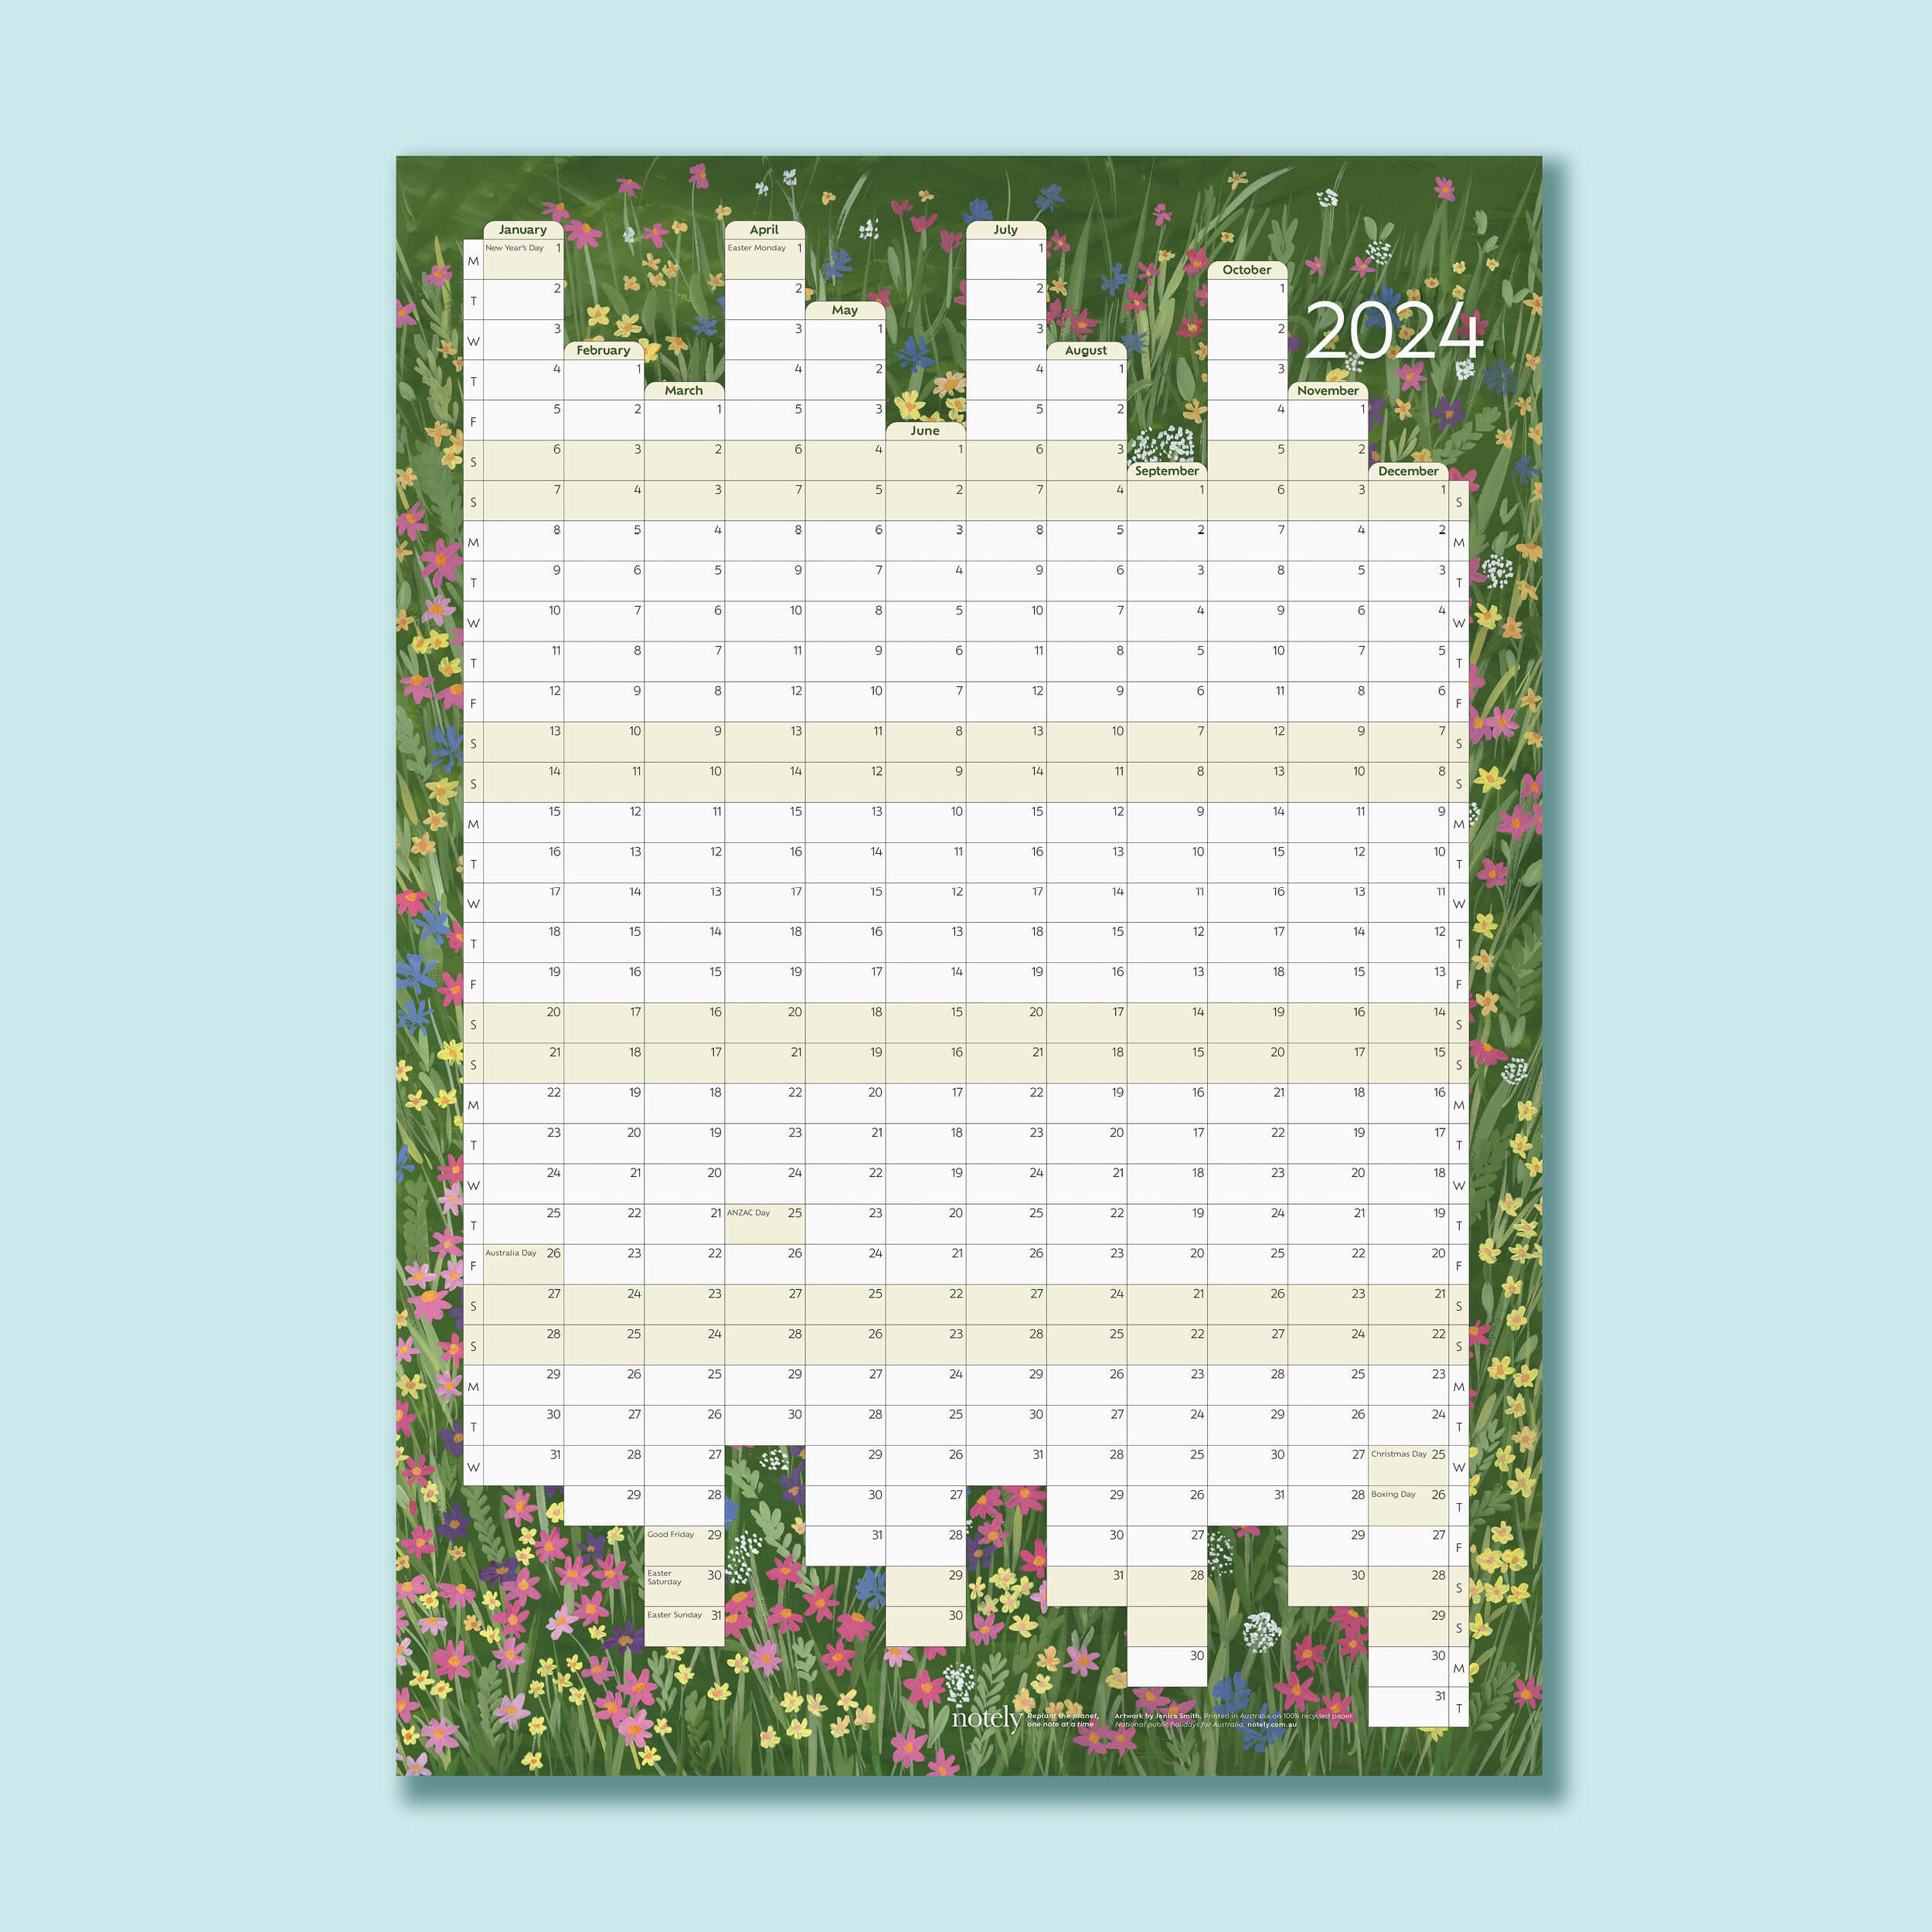 Notely 2024 wall planner in A2 portrait size